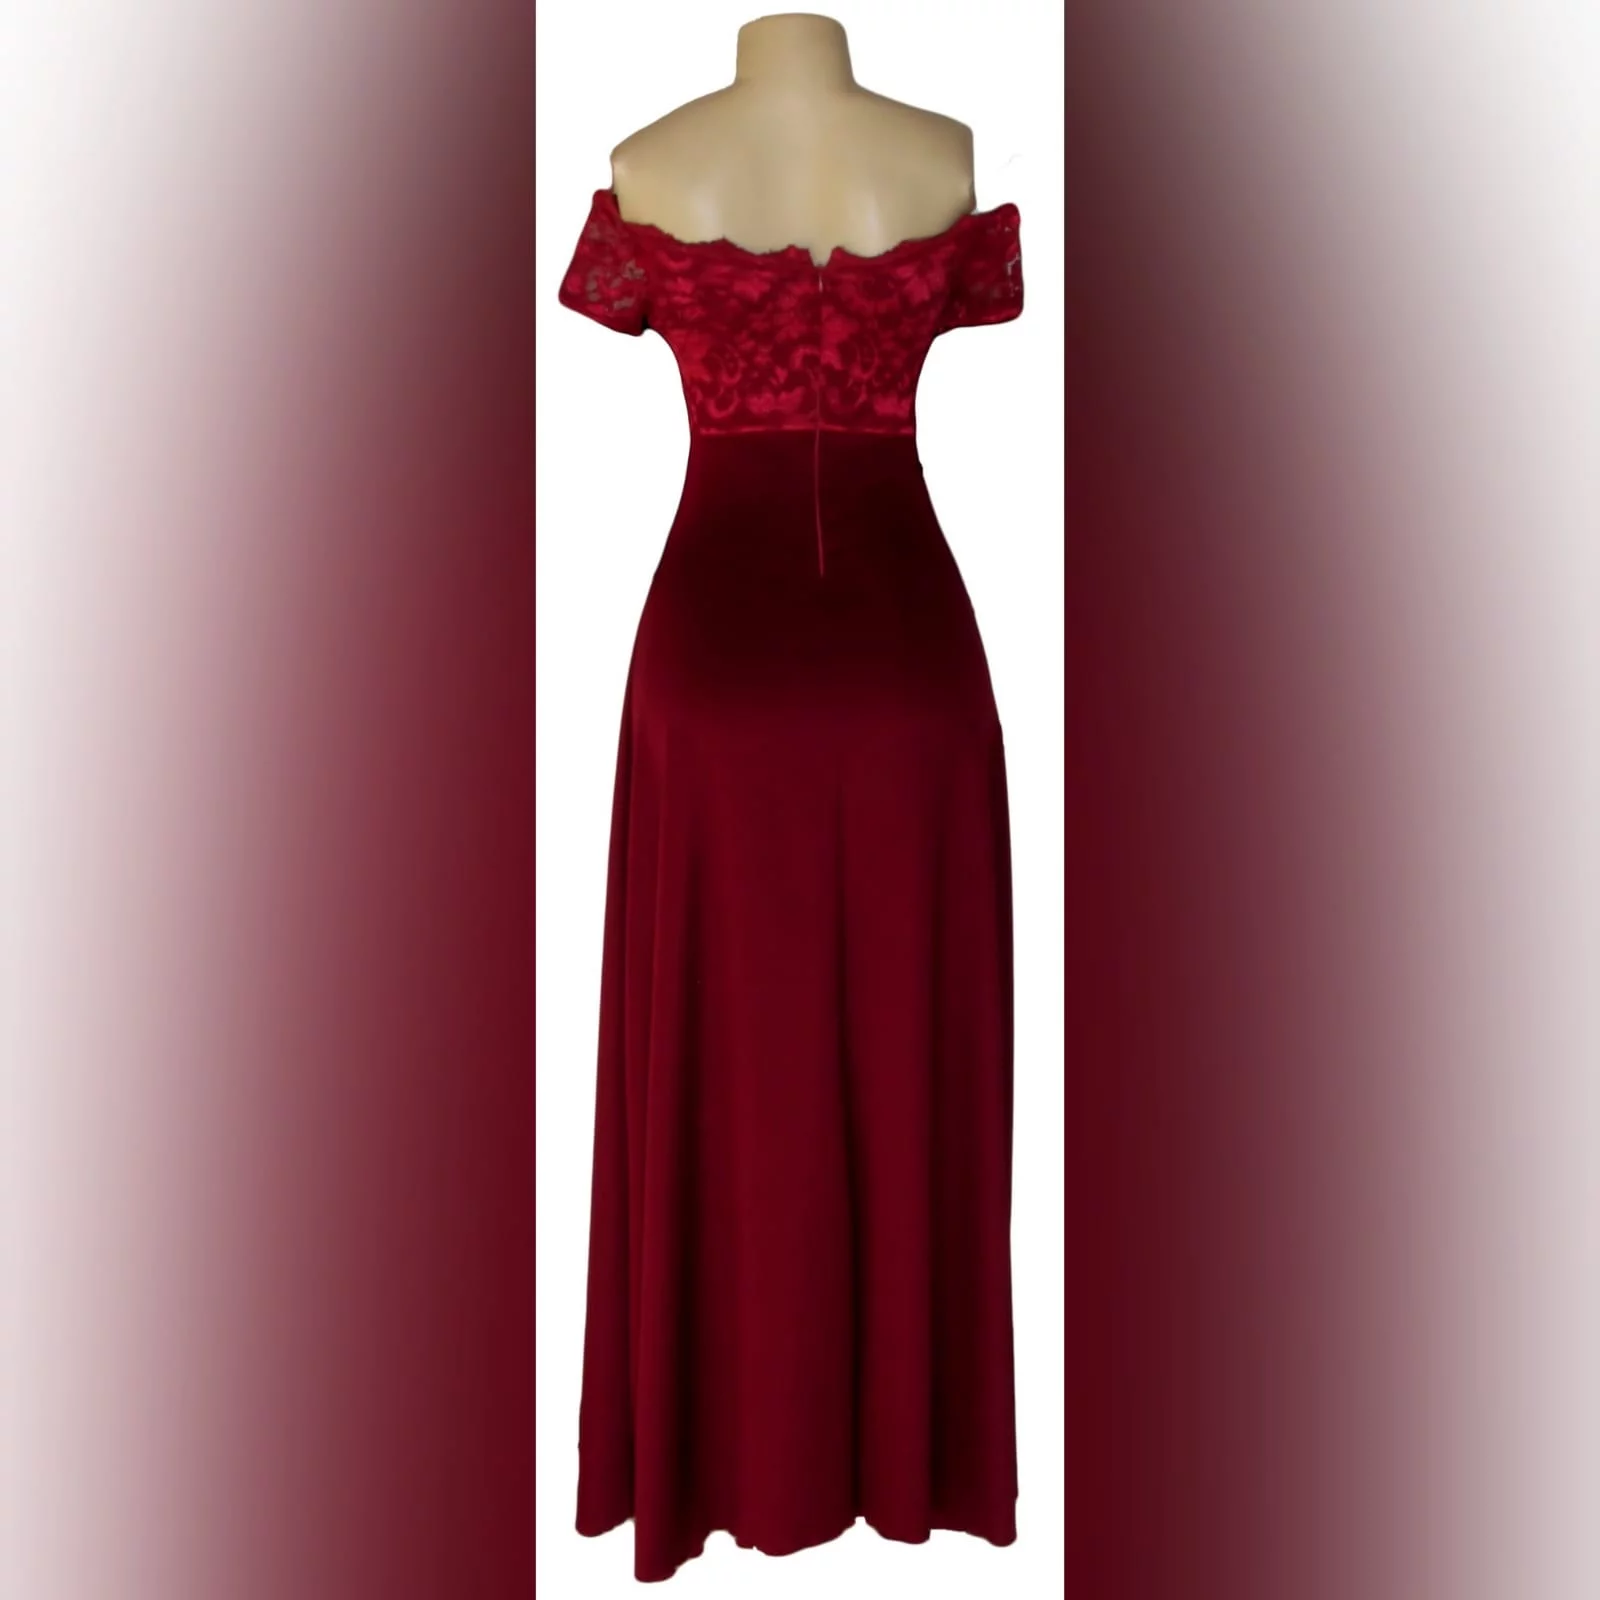 Maroon double slit matric dance dress 4 maroon double slit matric dance dress with an off shoulder lace bodice and a detachable belt.